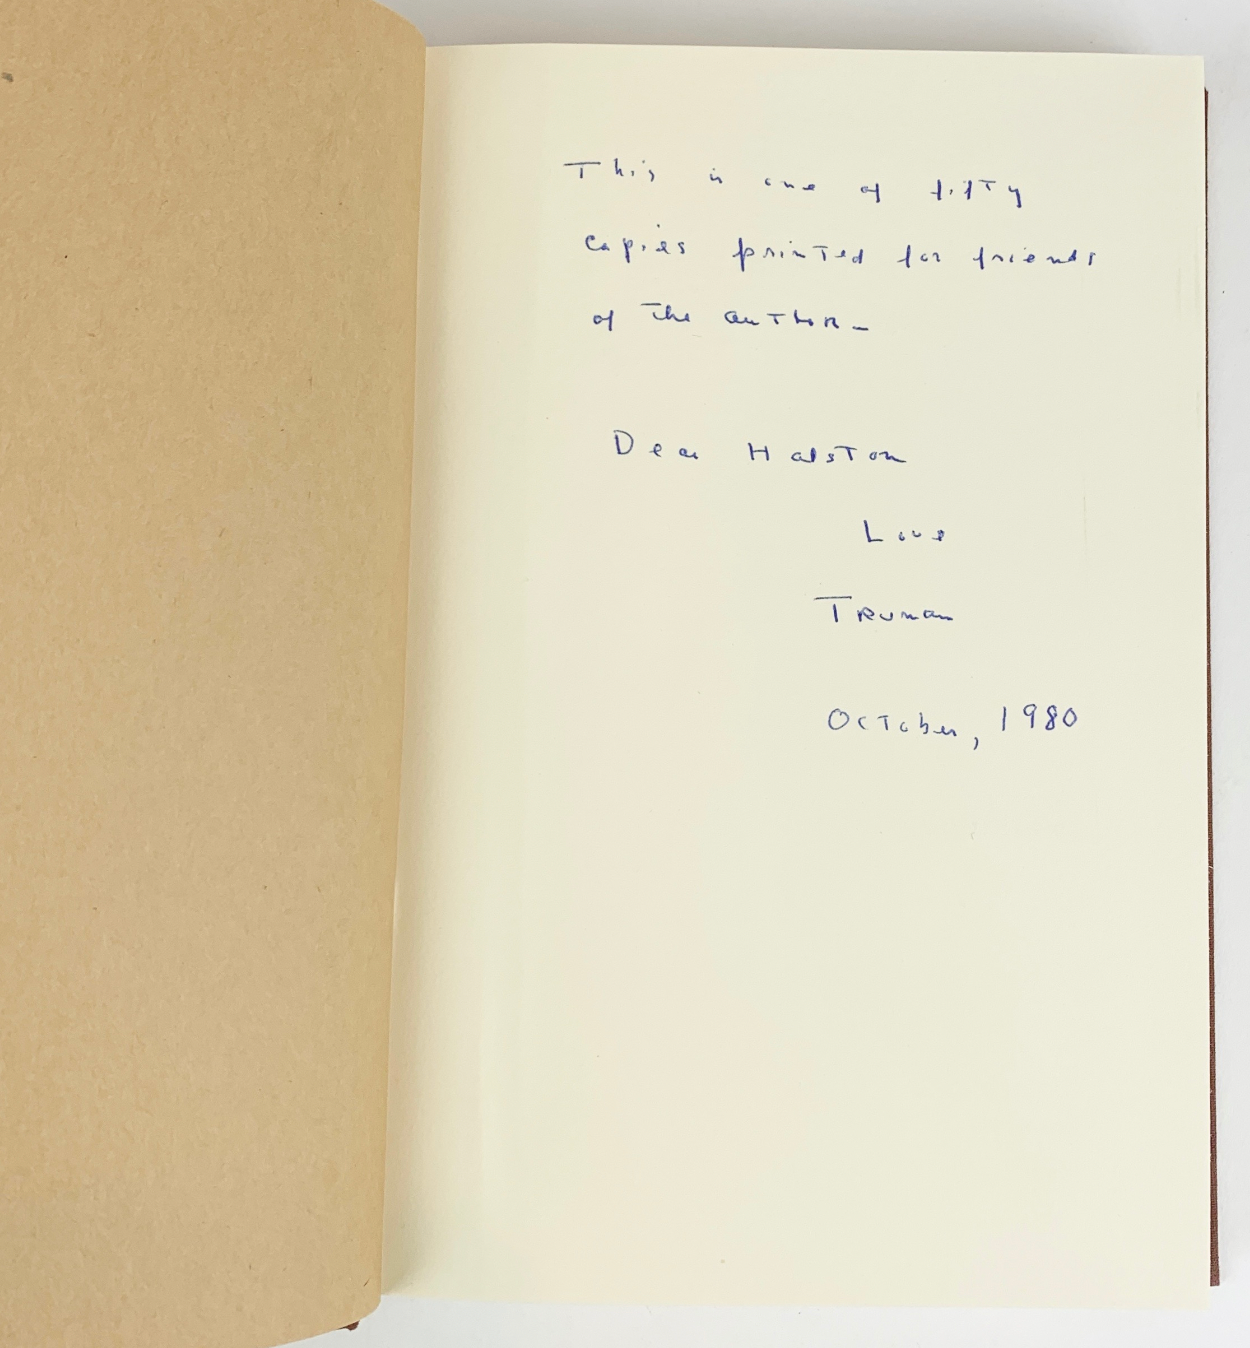 Capote, Truman. (1924-1984) [Halston, Roy. (1932-1990)]: "Music for Chameleons" – Signed and Inscribed to Halston